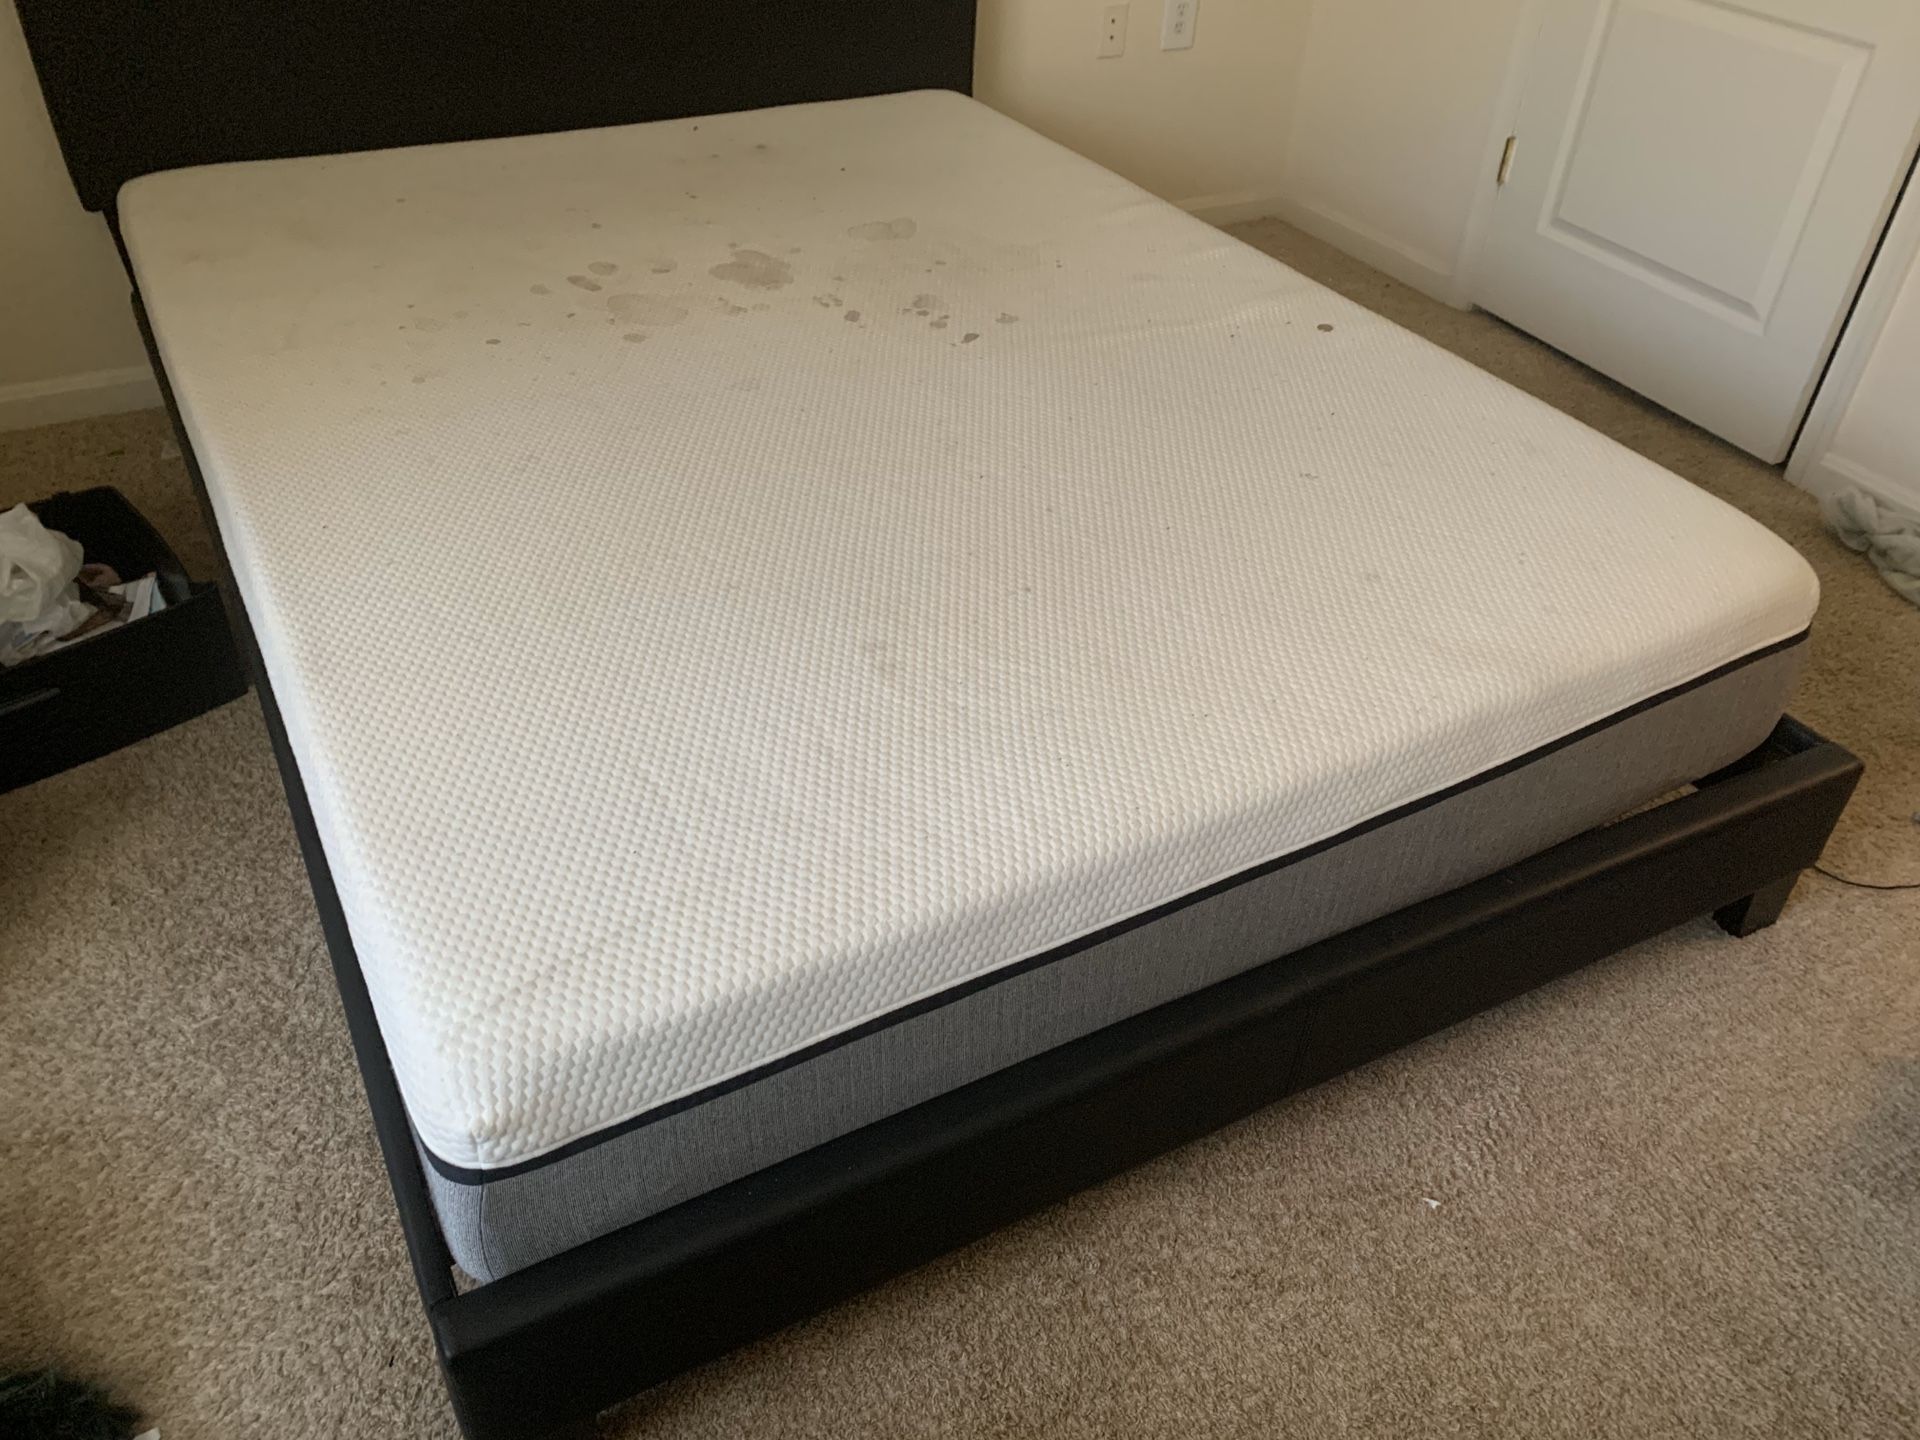 Full size Matress & Bed Frame ( together or seperate )